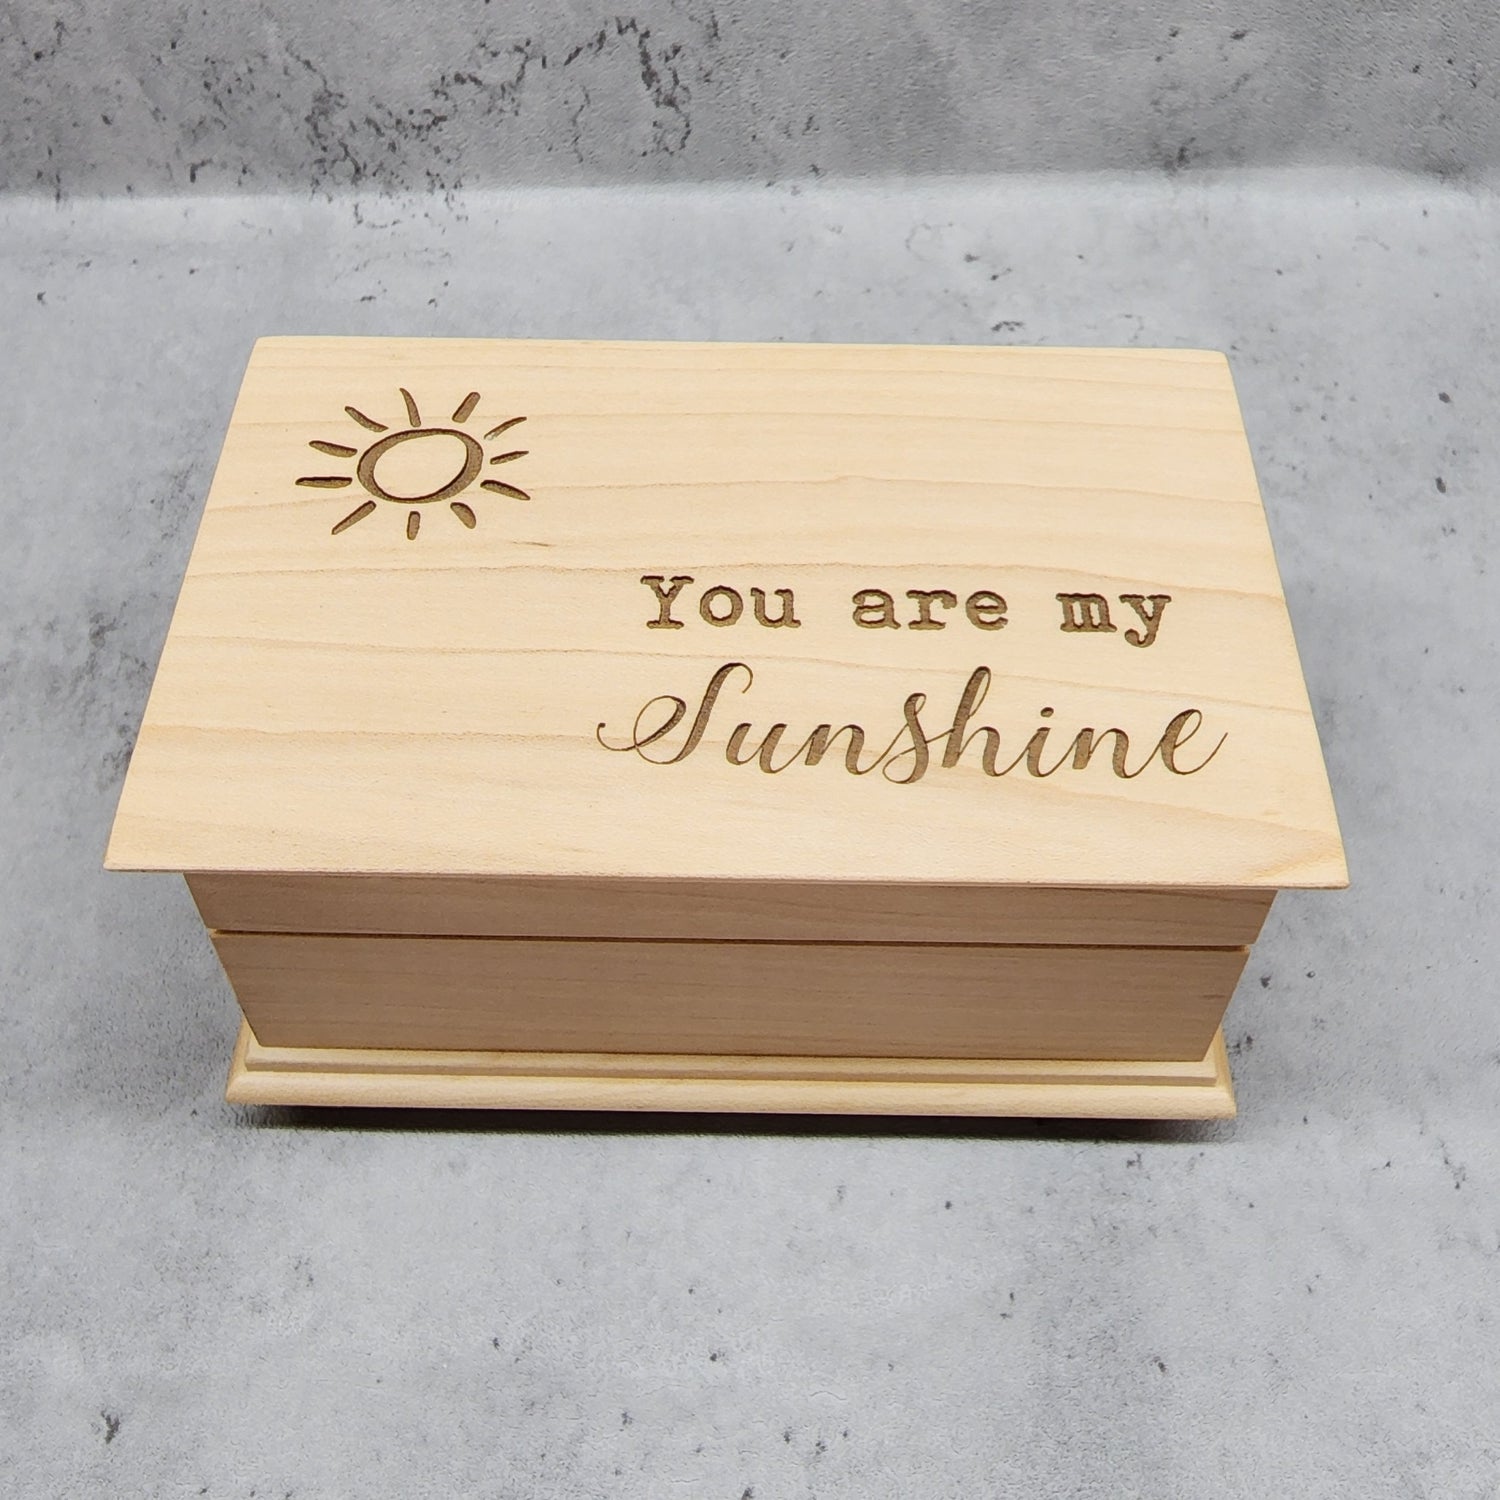 You are my sunshine engraved music jewelry box in maple color